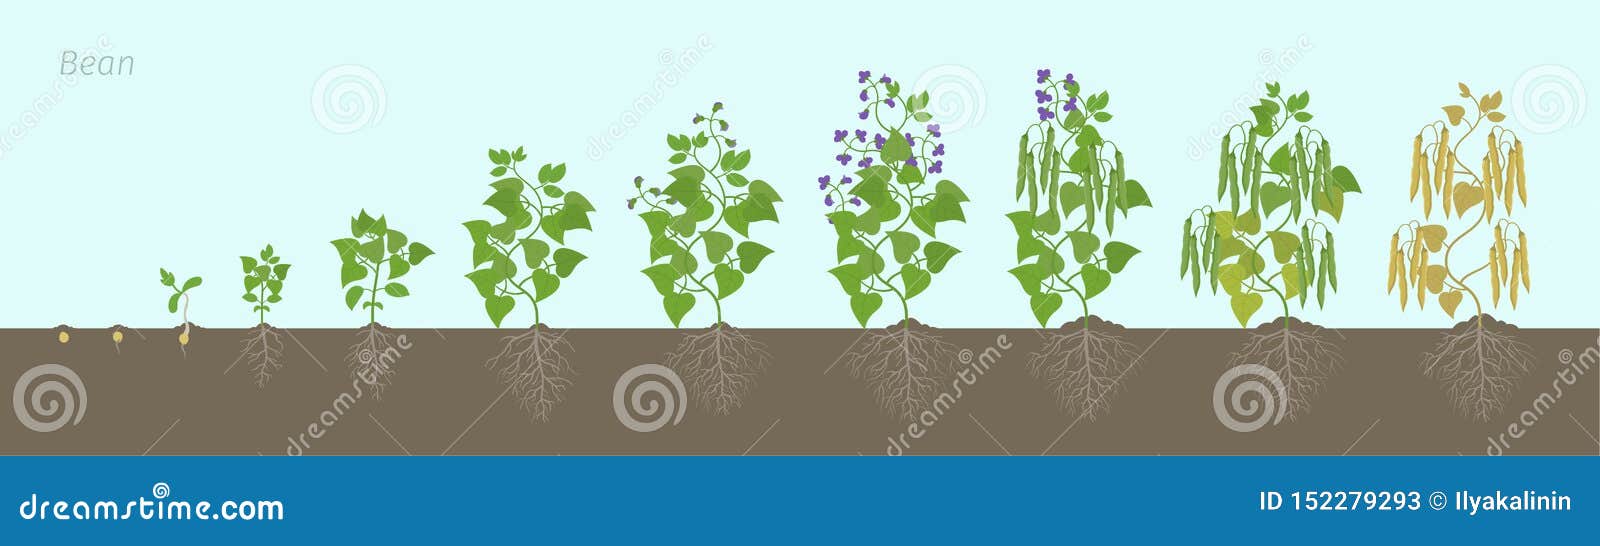 Growth Stages of Bean Plant with Roots in the Soil. Bean Family Fabaceae  Phases Set Ripening Period. Life Cycle, Animation Stock Illustration -  Illustration of growing, sprout: 152279293